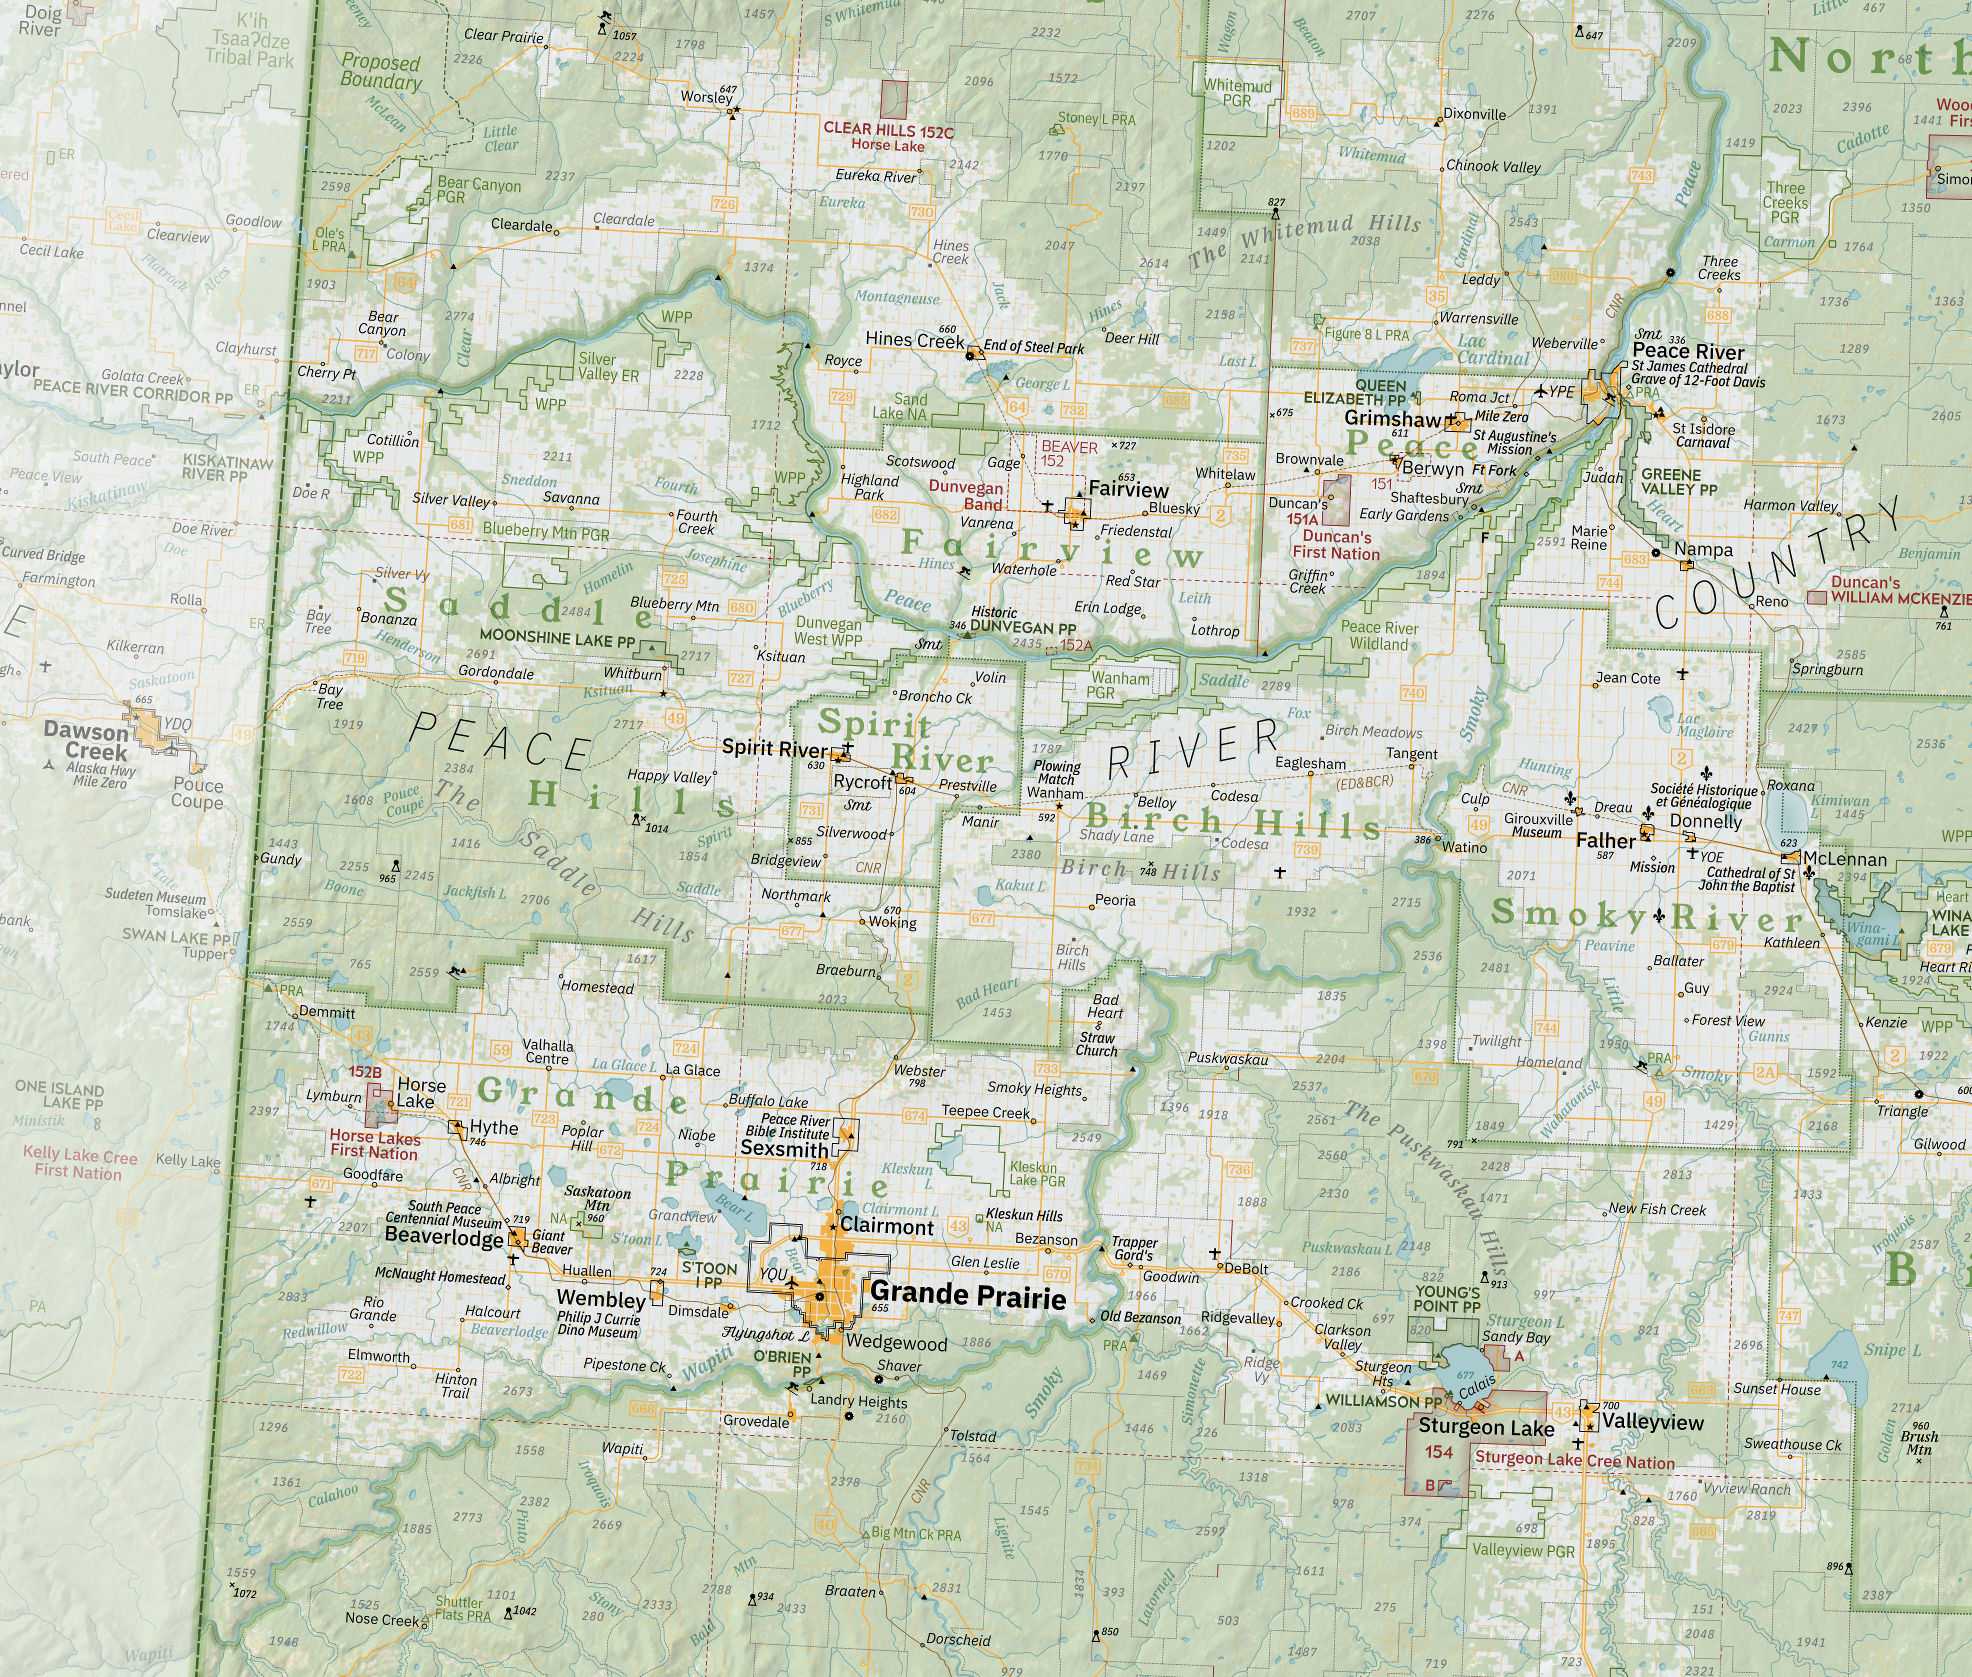 A map of the Peace River Country.